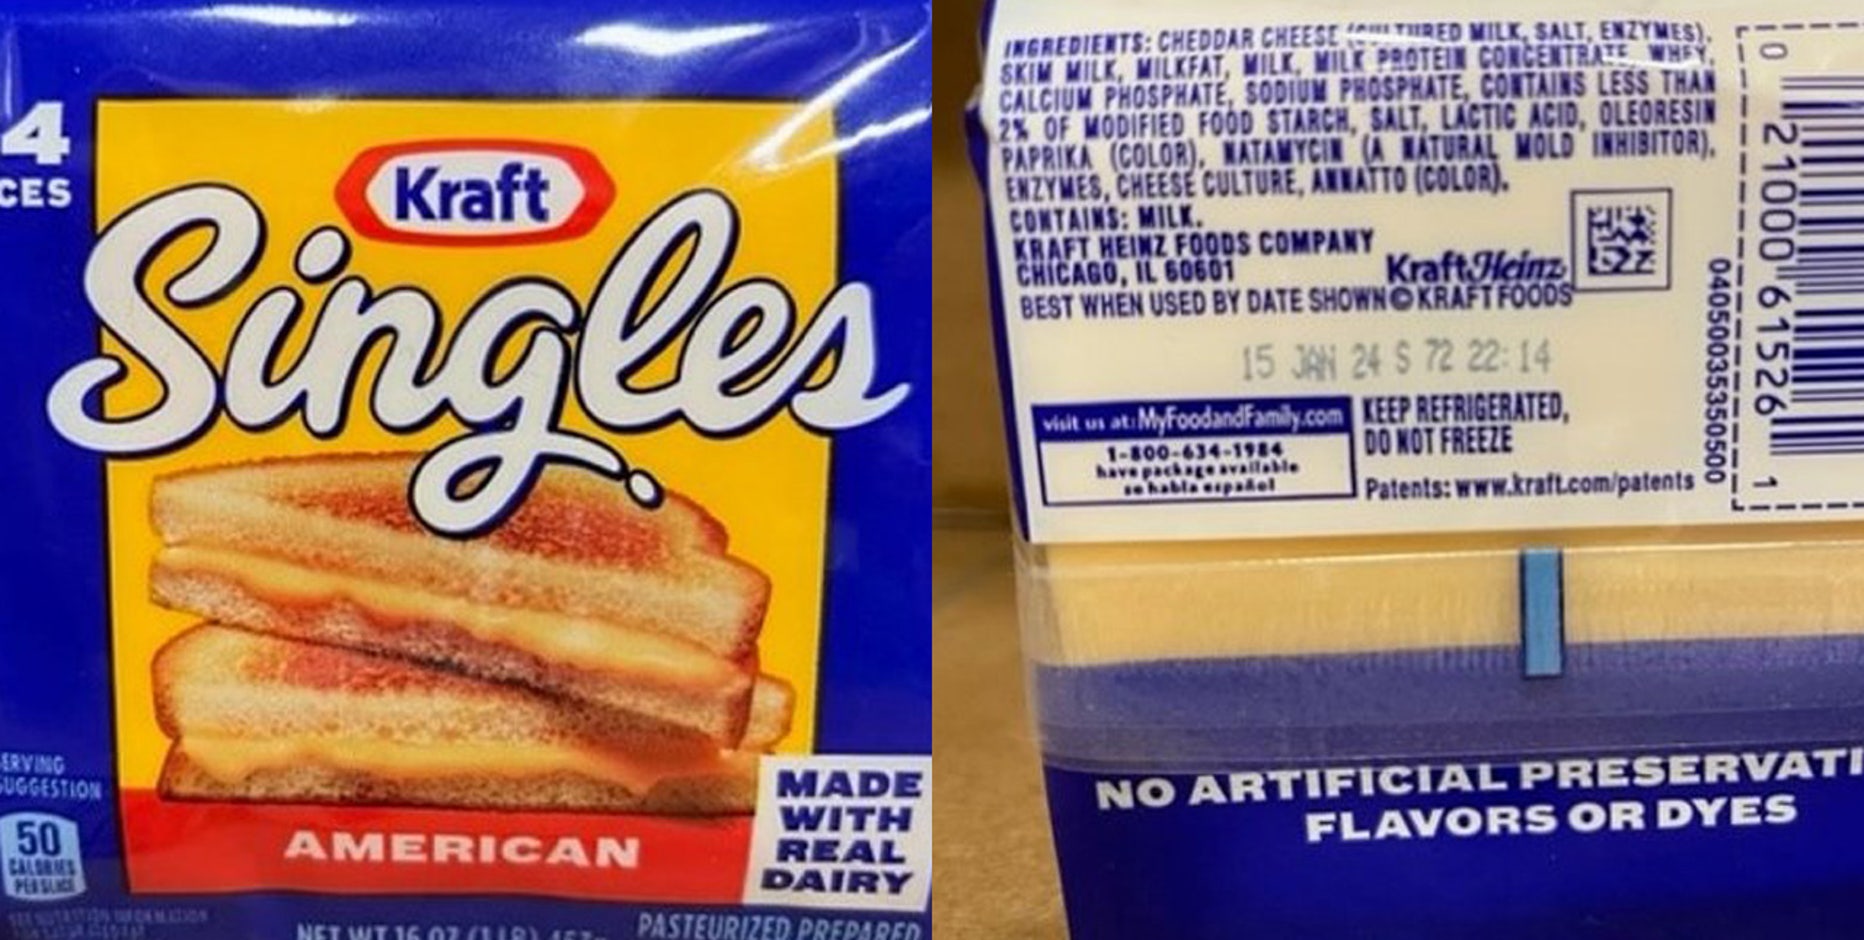 Latest consumer product recalls Kraft cheese slices, 58K pounds of